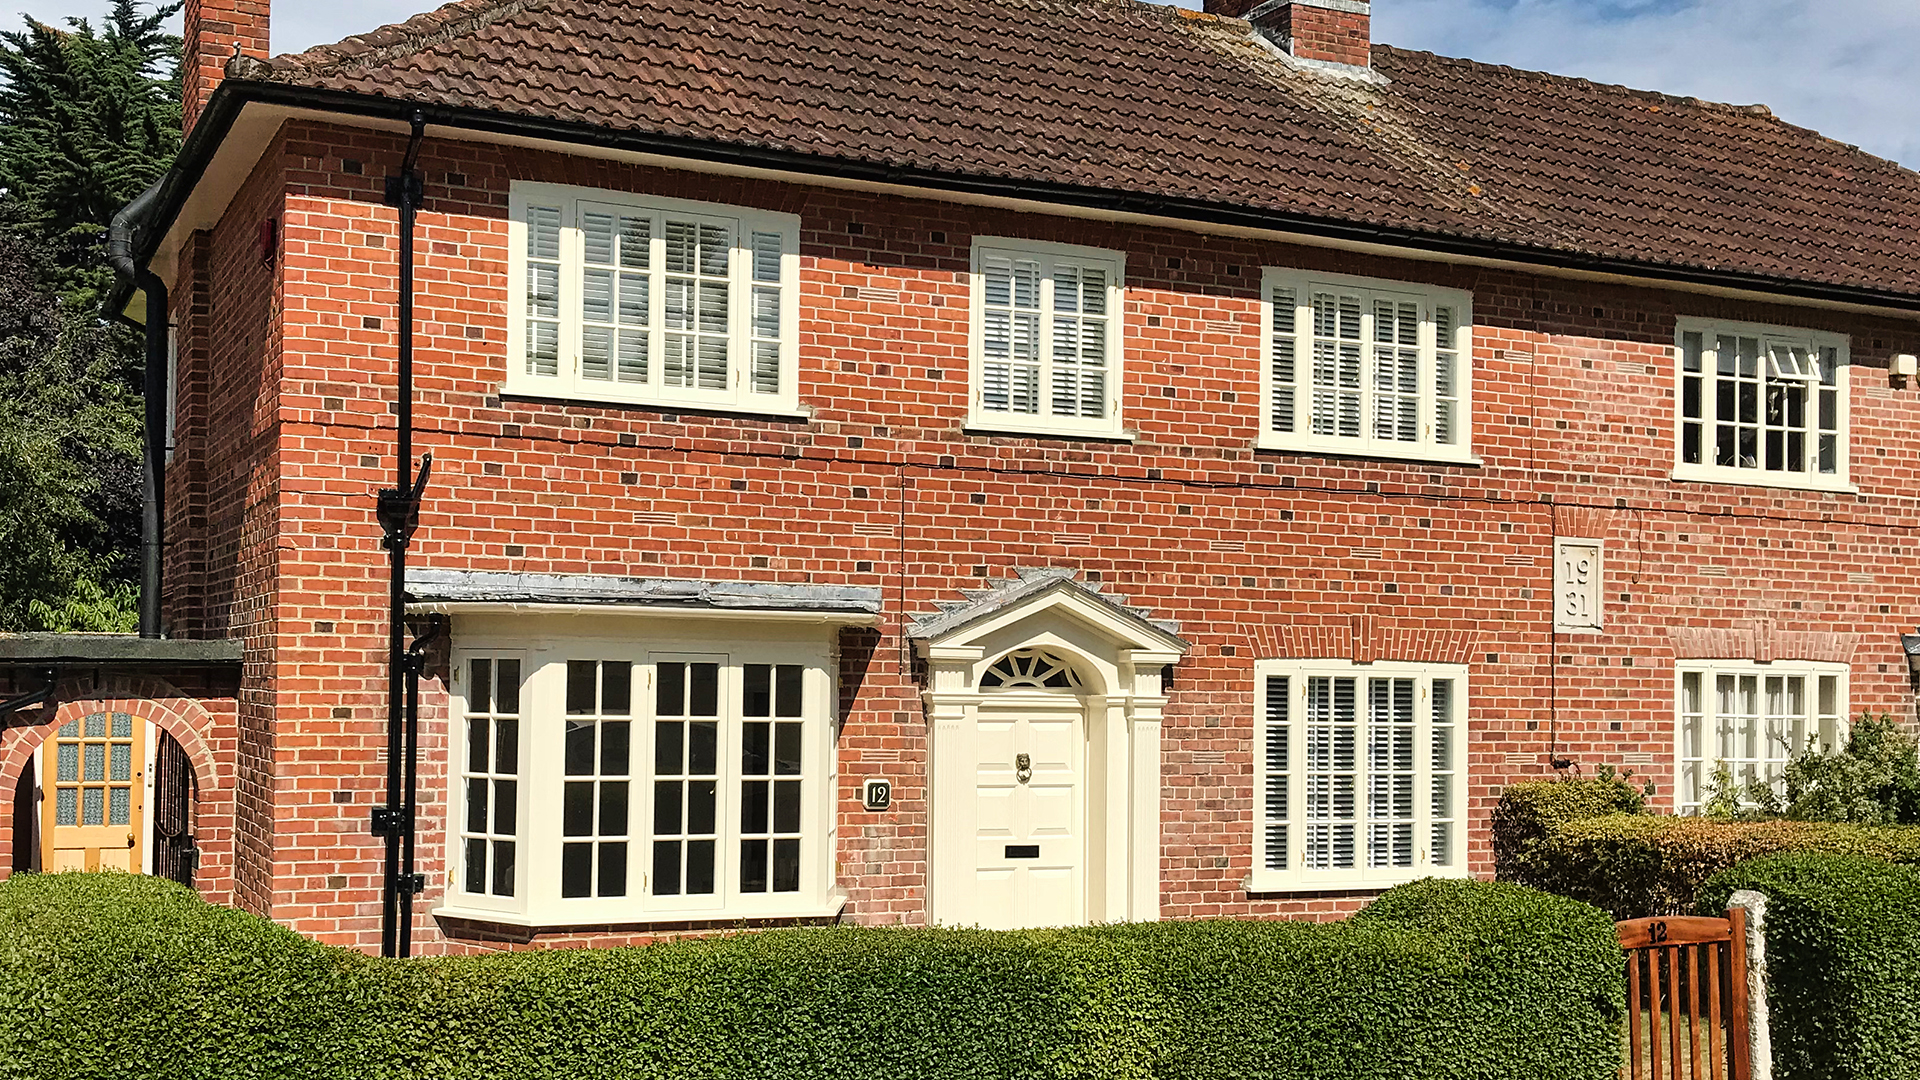 Specialist Heritage Joinery | Box Sash & Casement Windows | Bowden Tailored Wood